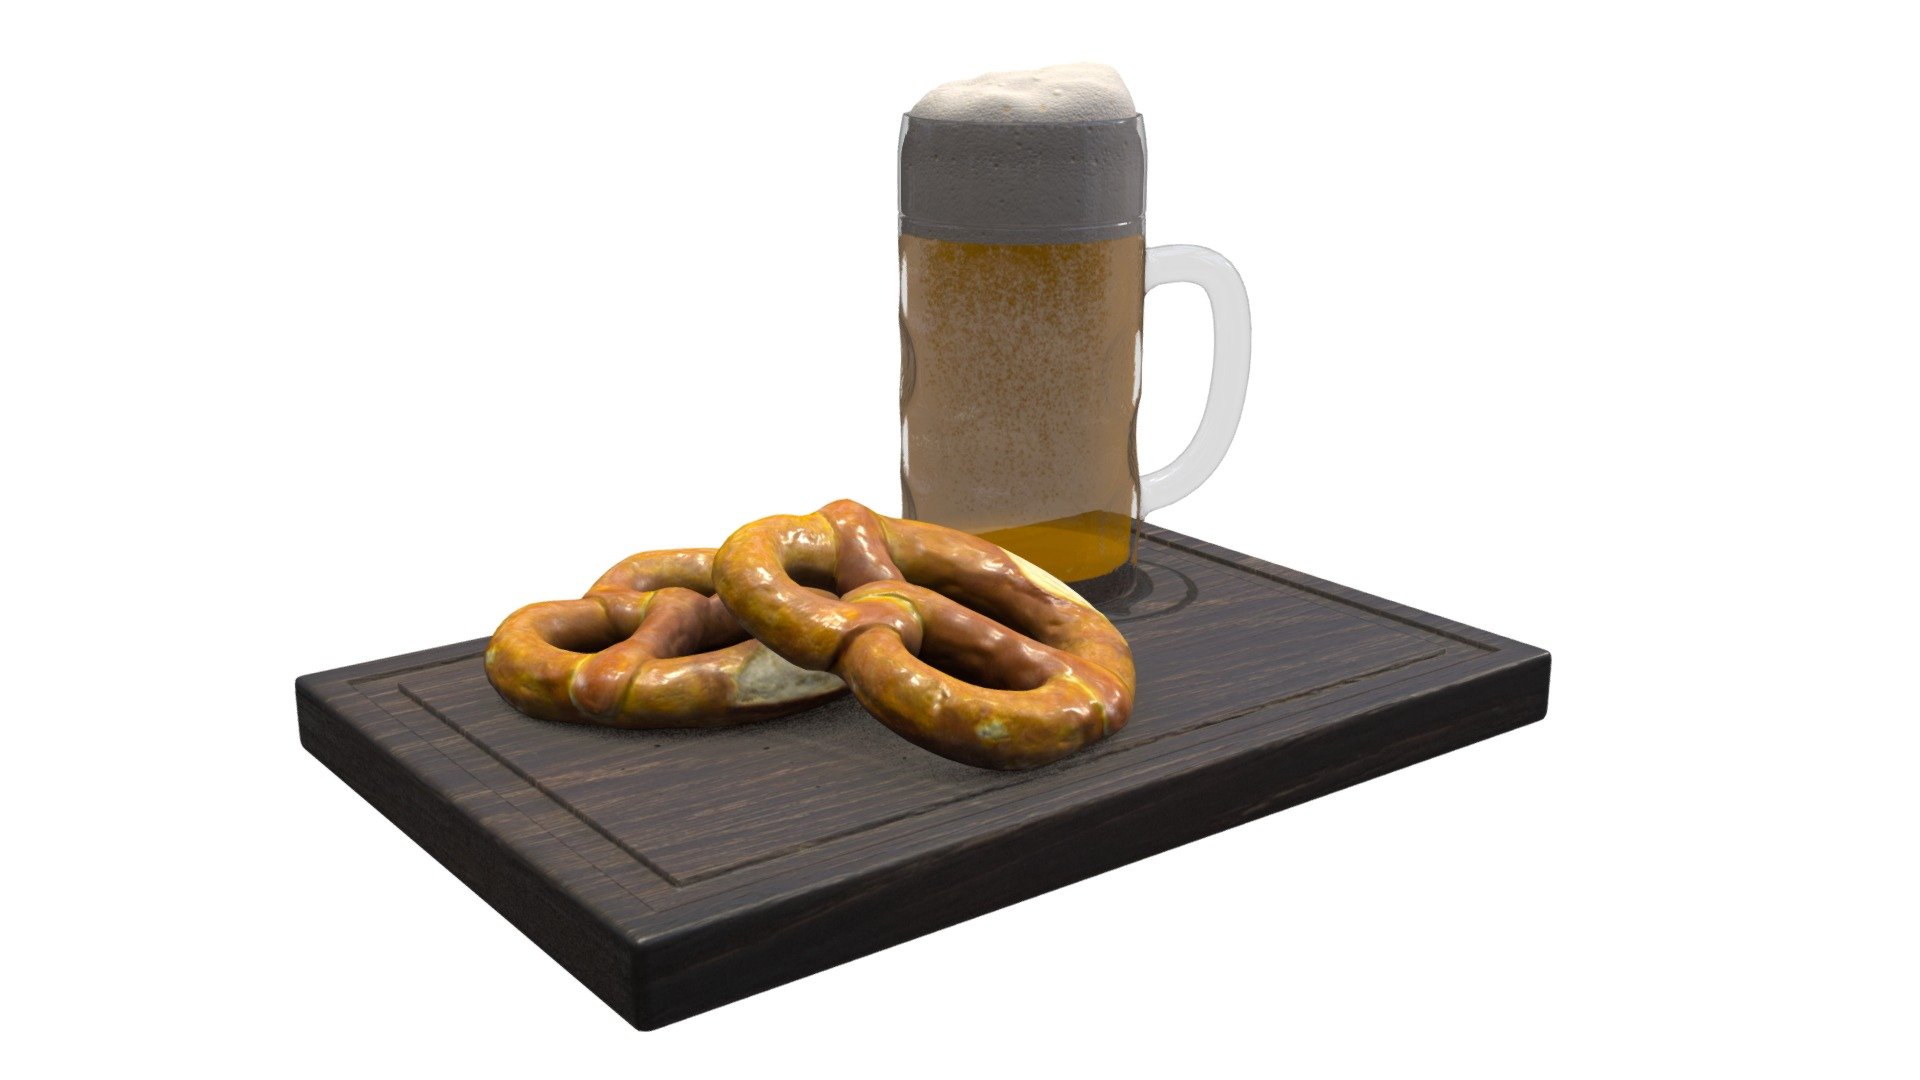 High-quality 3d model of a rustic board with a Mug of Beer, and two large pretzels. PBR version

27972 triangles - Food Set 05 / Beer and Pretzels / PBR - Buy Royalty Free 3D model by 3detto 3d model